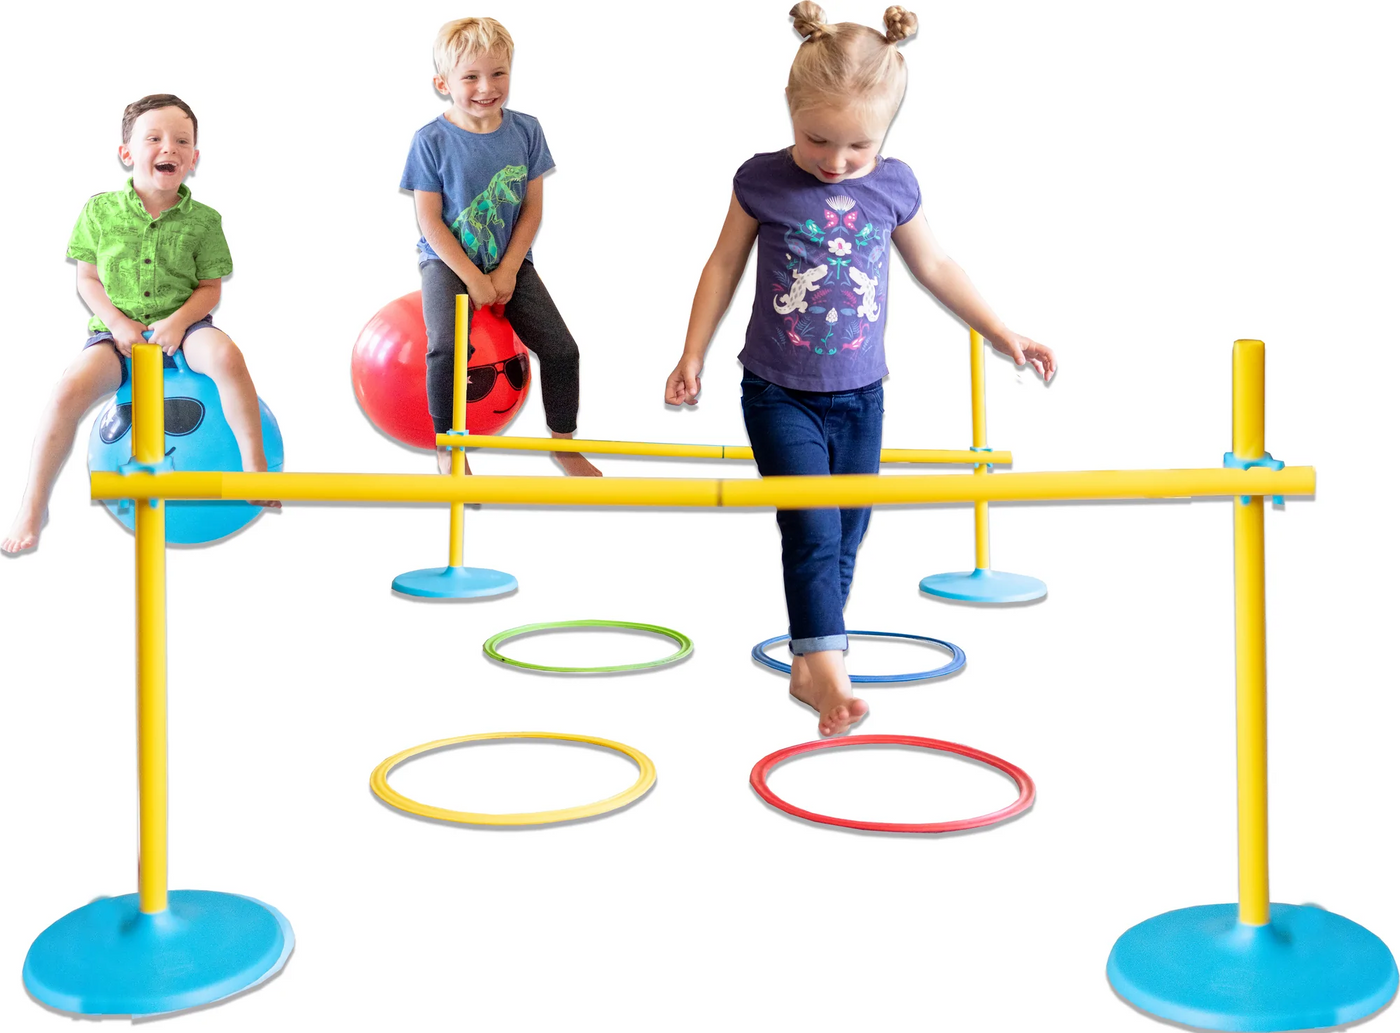 Playzone Fit Obstacle Course